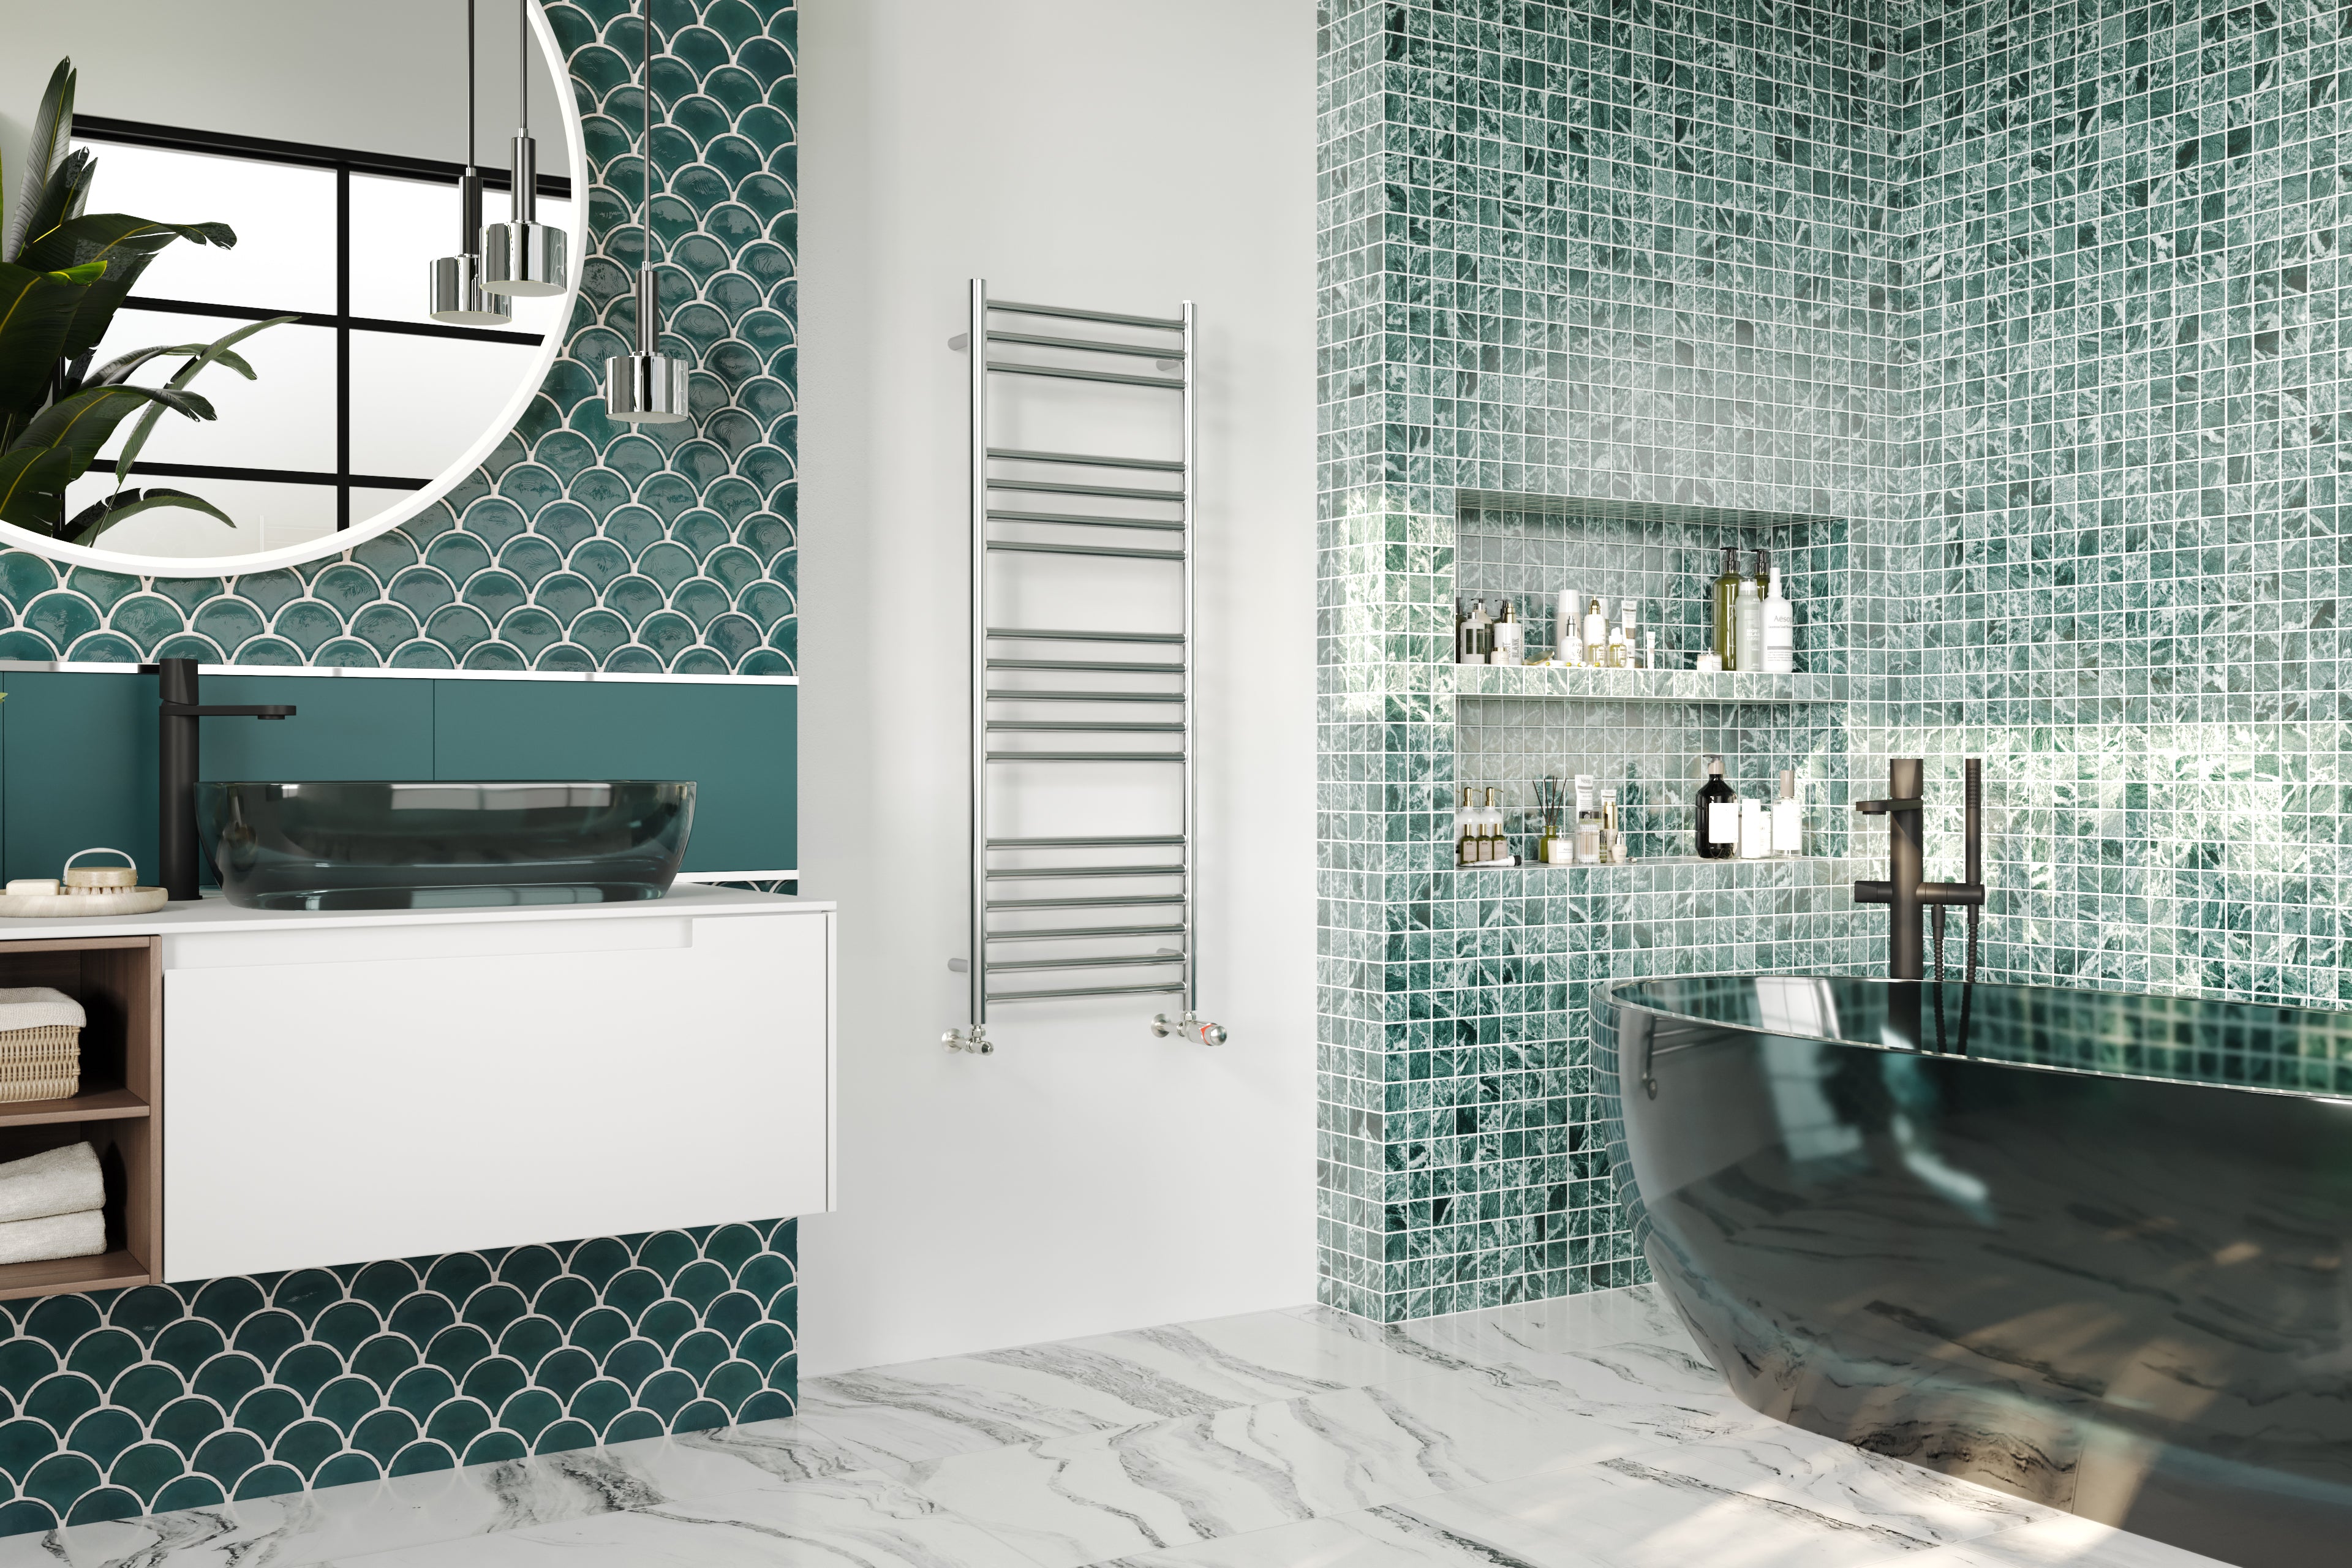 An Aston stainless steel heated towel rail is mounted to a white wall between a green tiled area with a bathtub and a turquoise wall with a sink space.